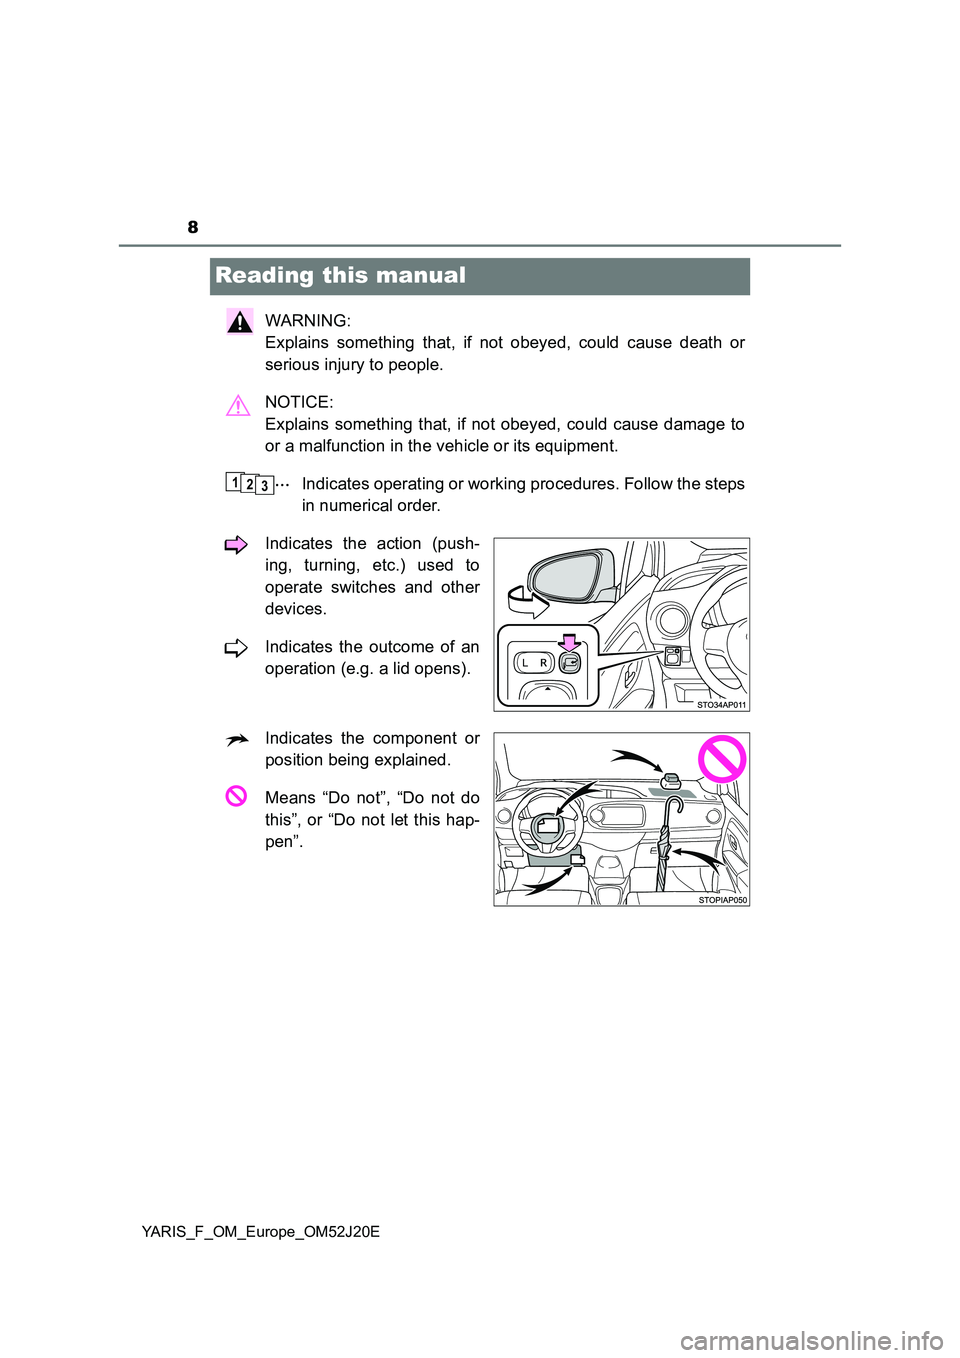 TOYOTA YARIS 2017  Owners Manual 8
YARIS_F_OM_Europe_OM52J20E
Reading this manual
WARNING:  
Explains something that, if not obeyed, could cause death or 
serious injury to people. 
NOTICE:  
Explains something that, if not obeyed, c